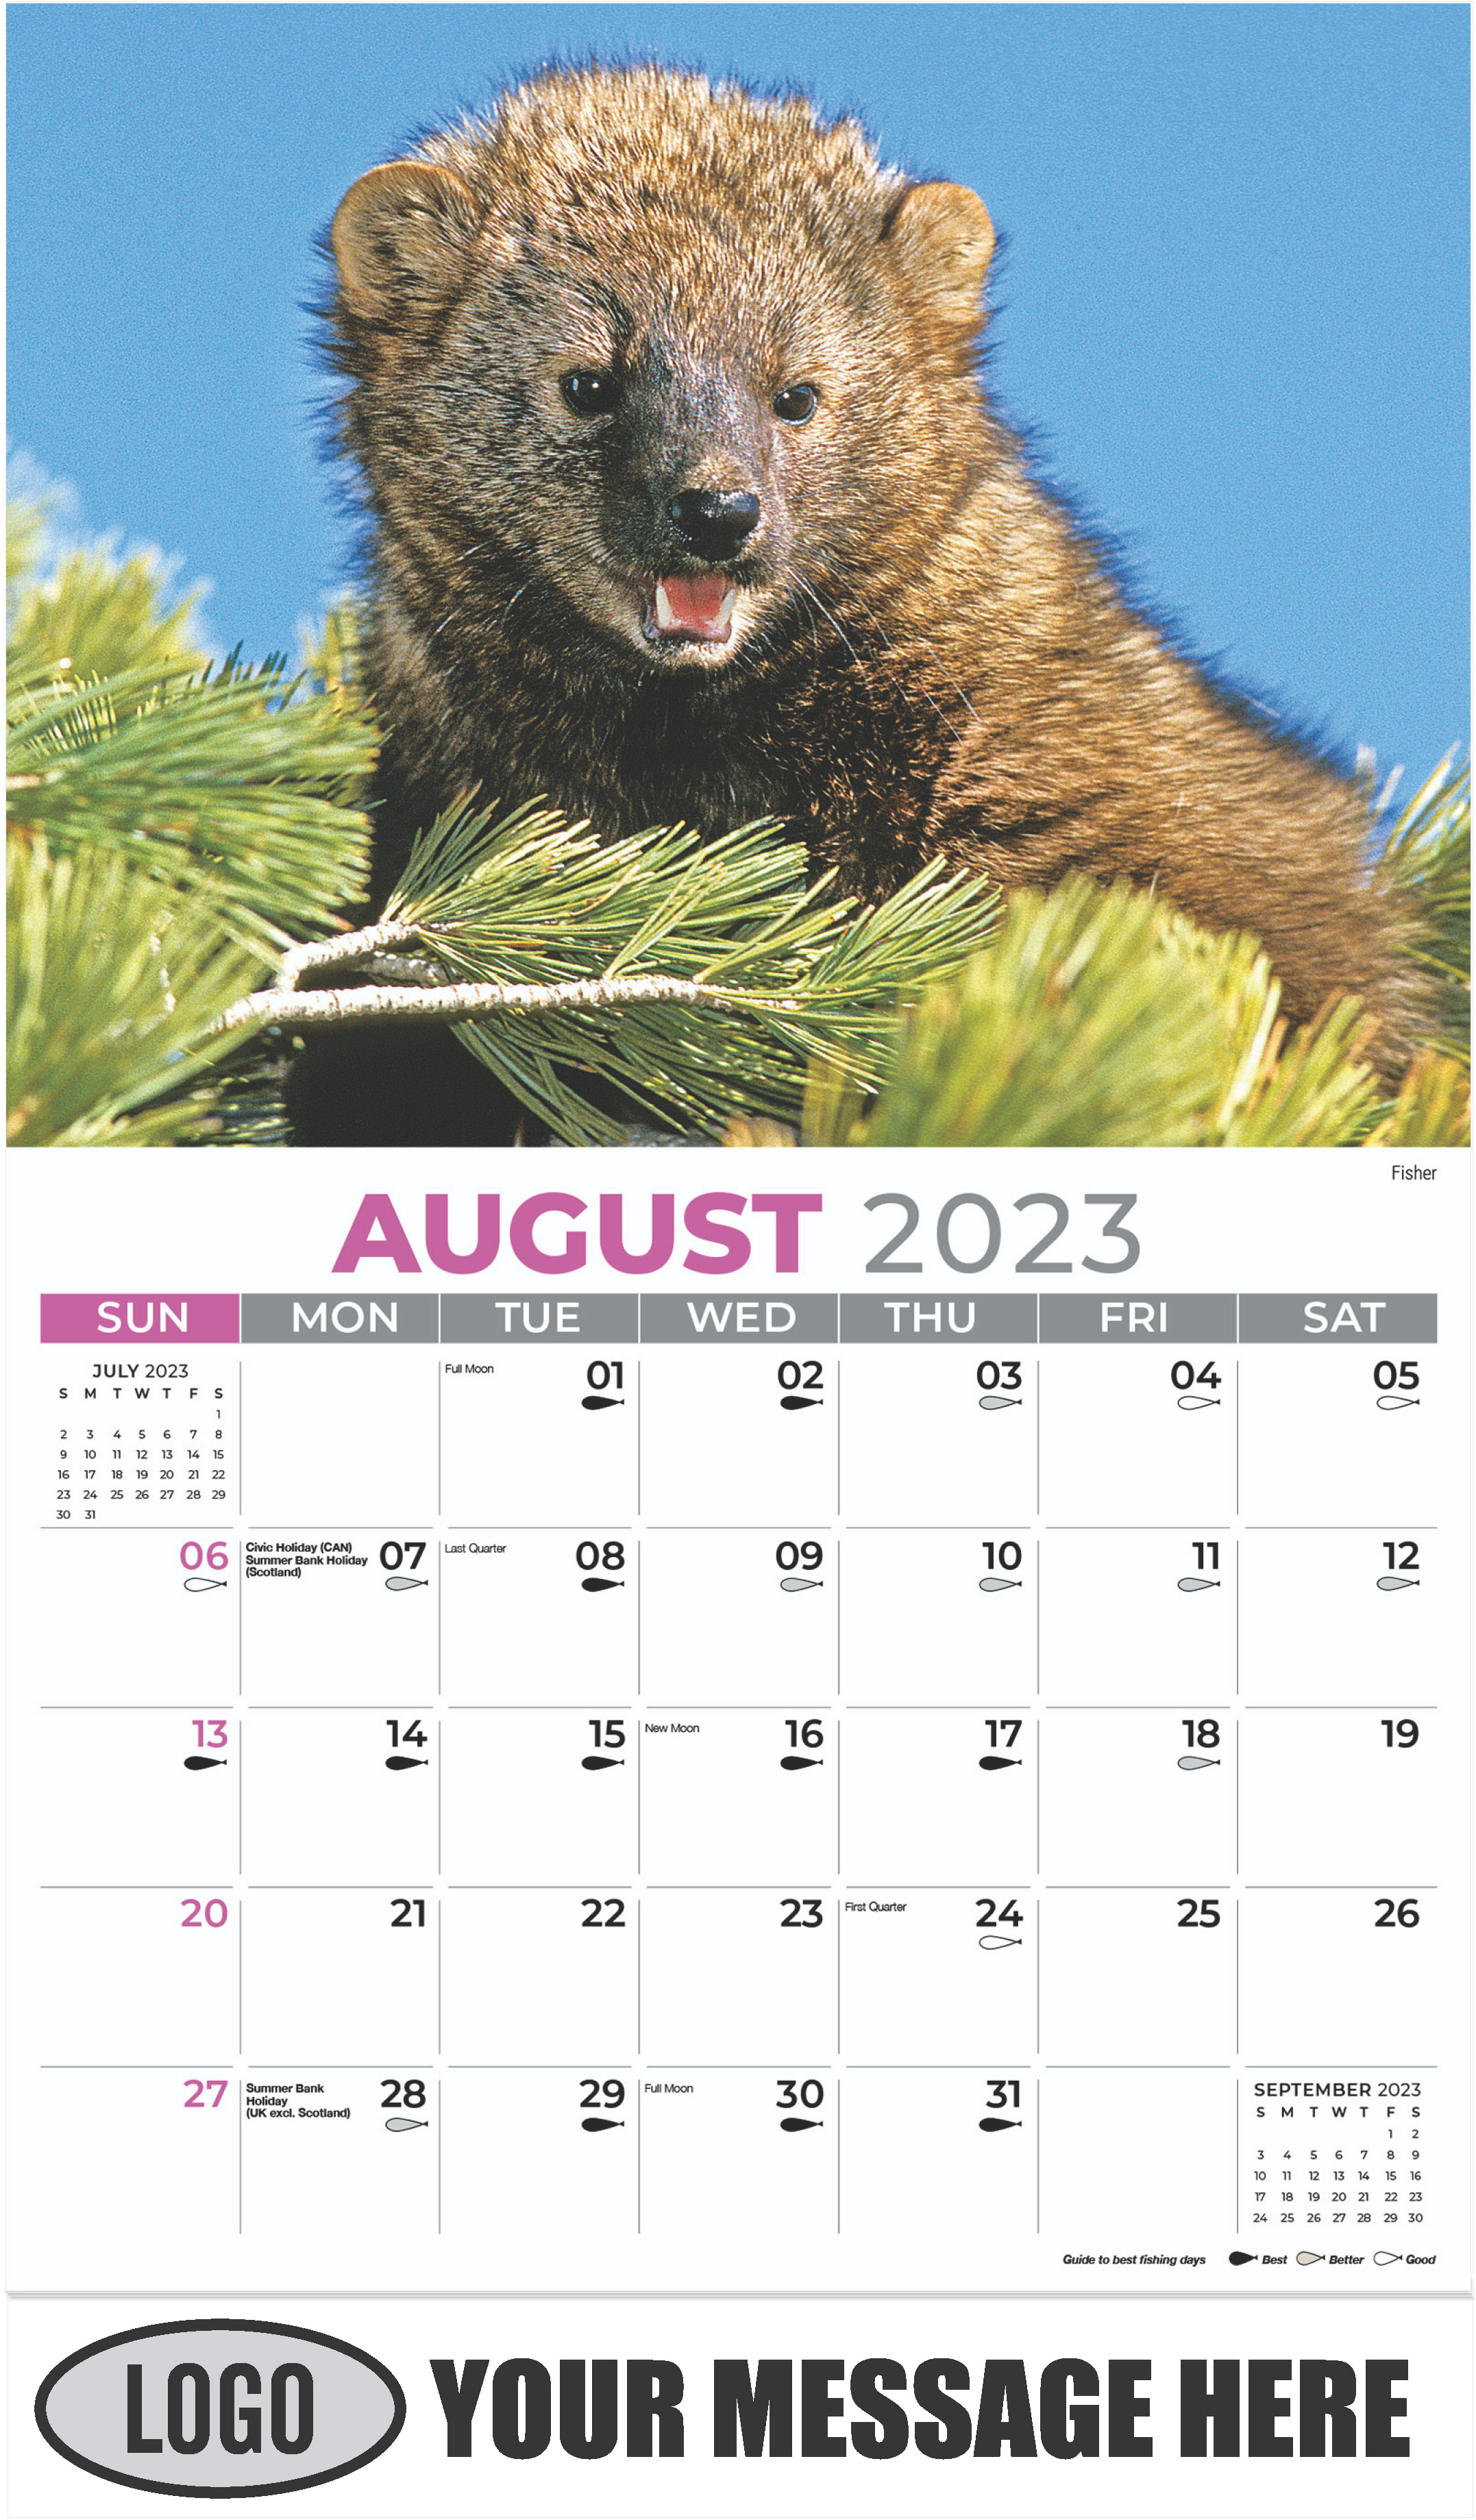 Fisher - August - North American Wildlife 2023 Promotional Calendar